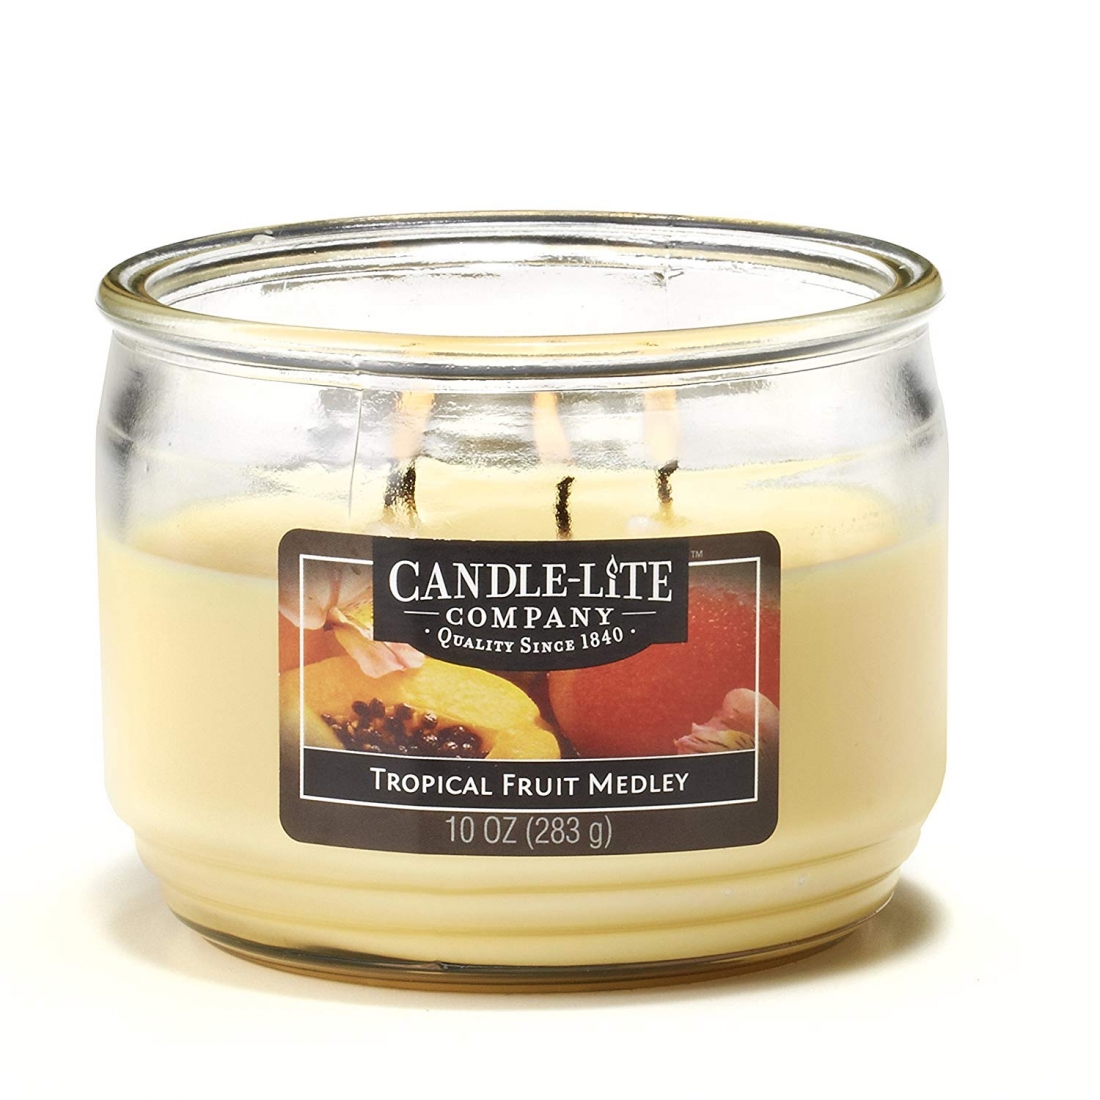 'Tropical Fruit Medley' Scented Candle - 283 g